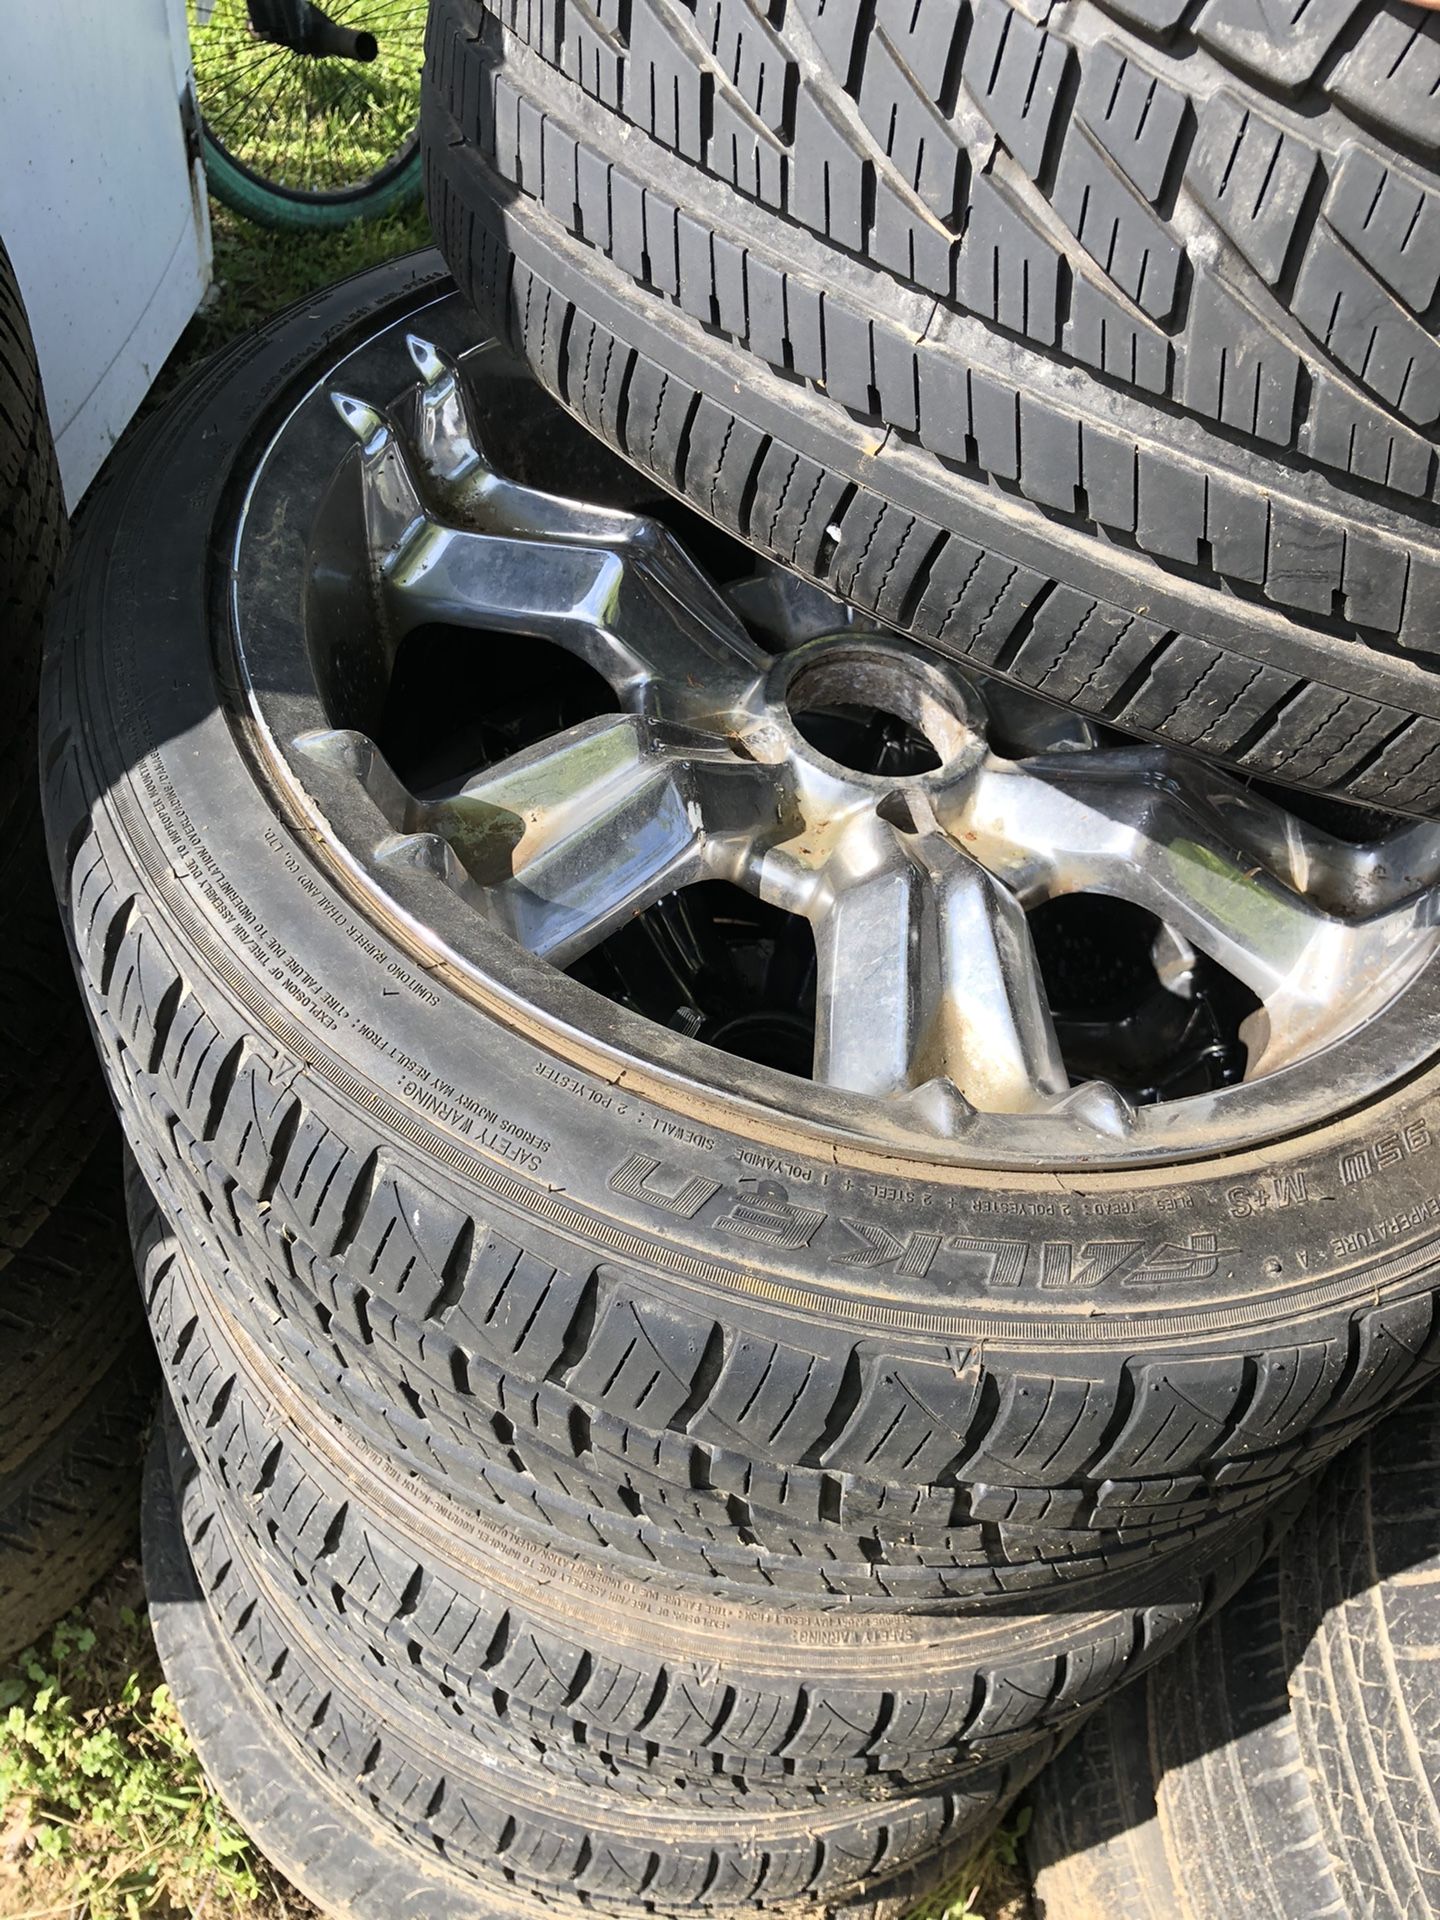 5 lug chrome chevy rims and low profile tires great tread. Also has 1 1/2 inch wheel spacers